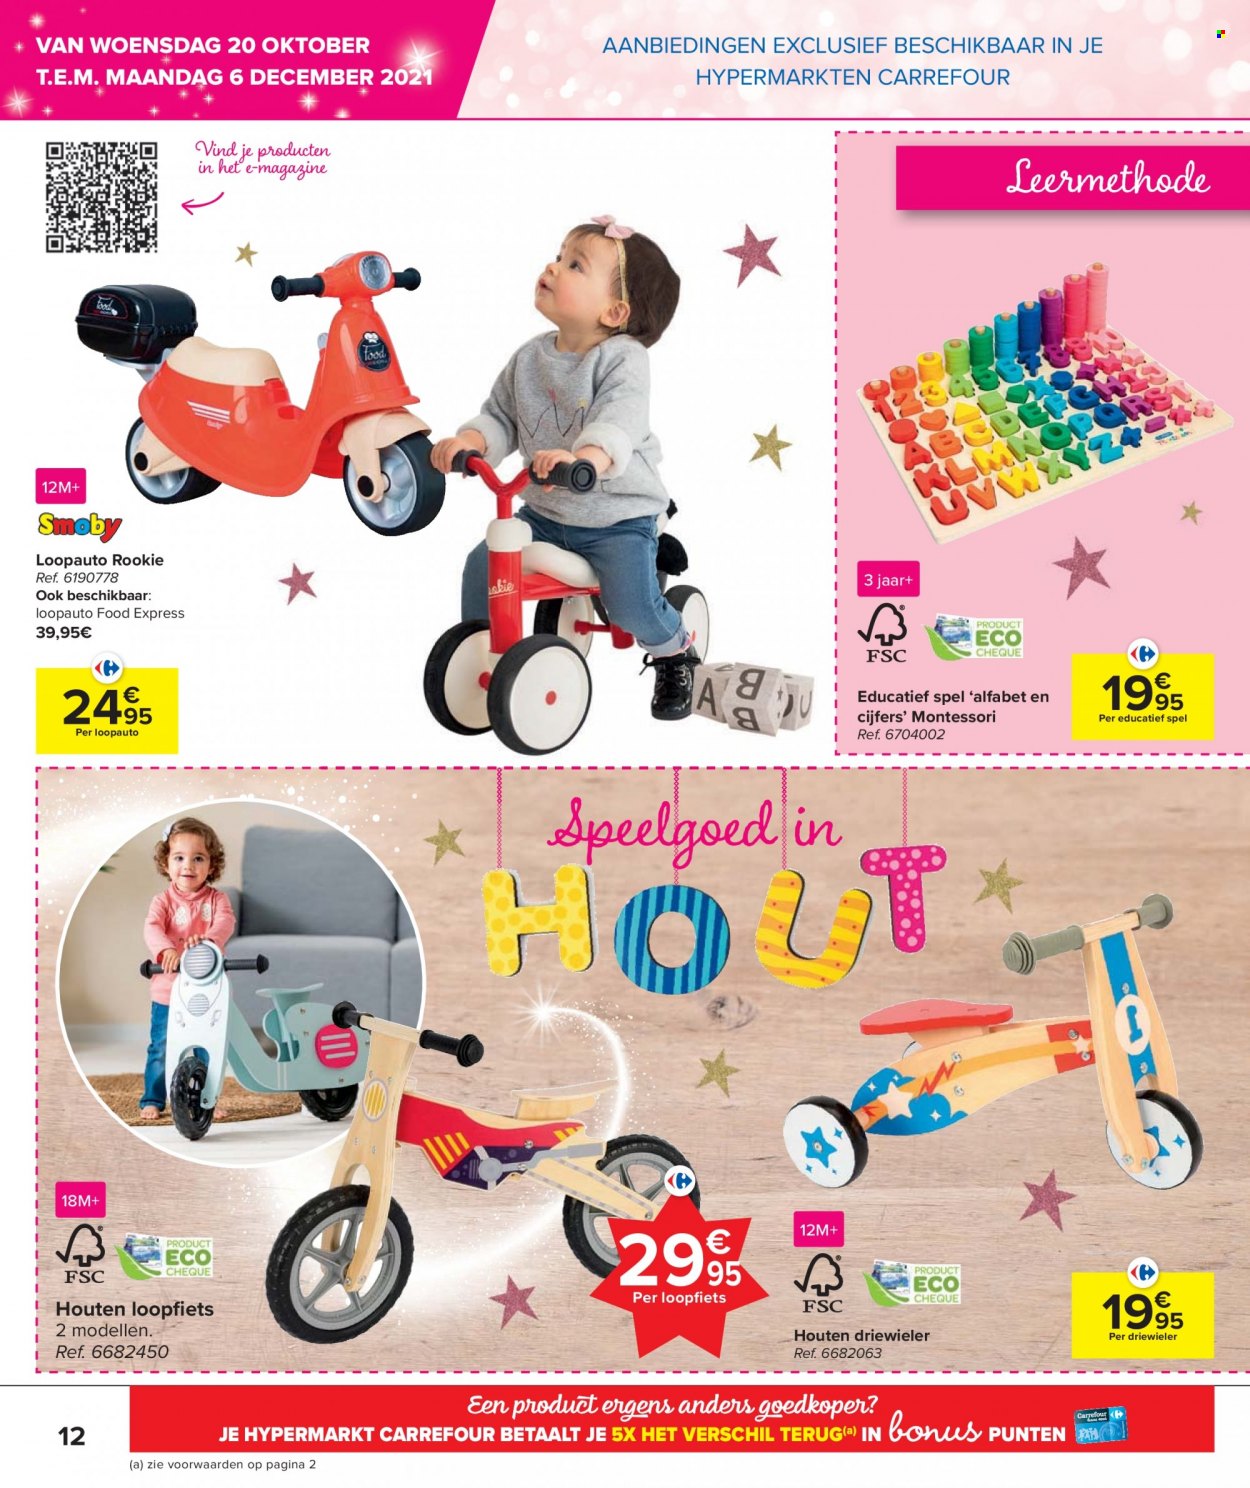 Catalogue Carrefour hypermarkt - 20.10.2021 - 6.12.2021. Page 12.